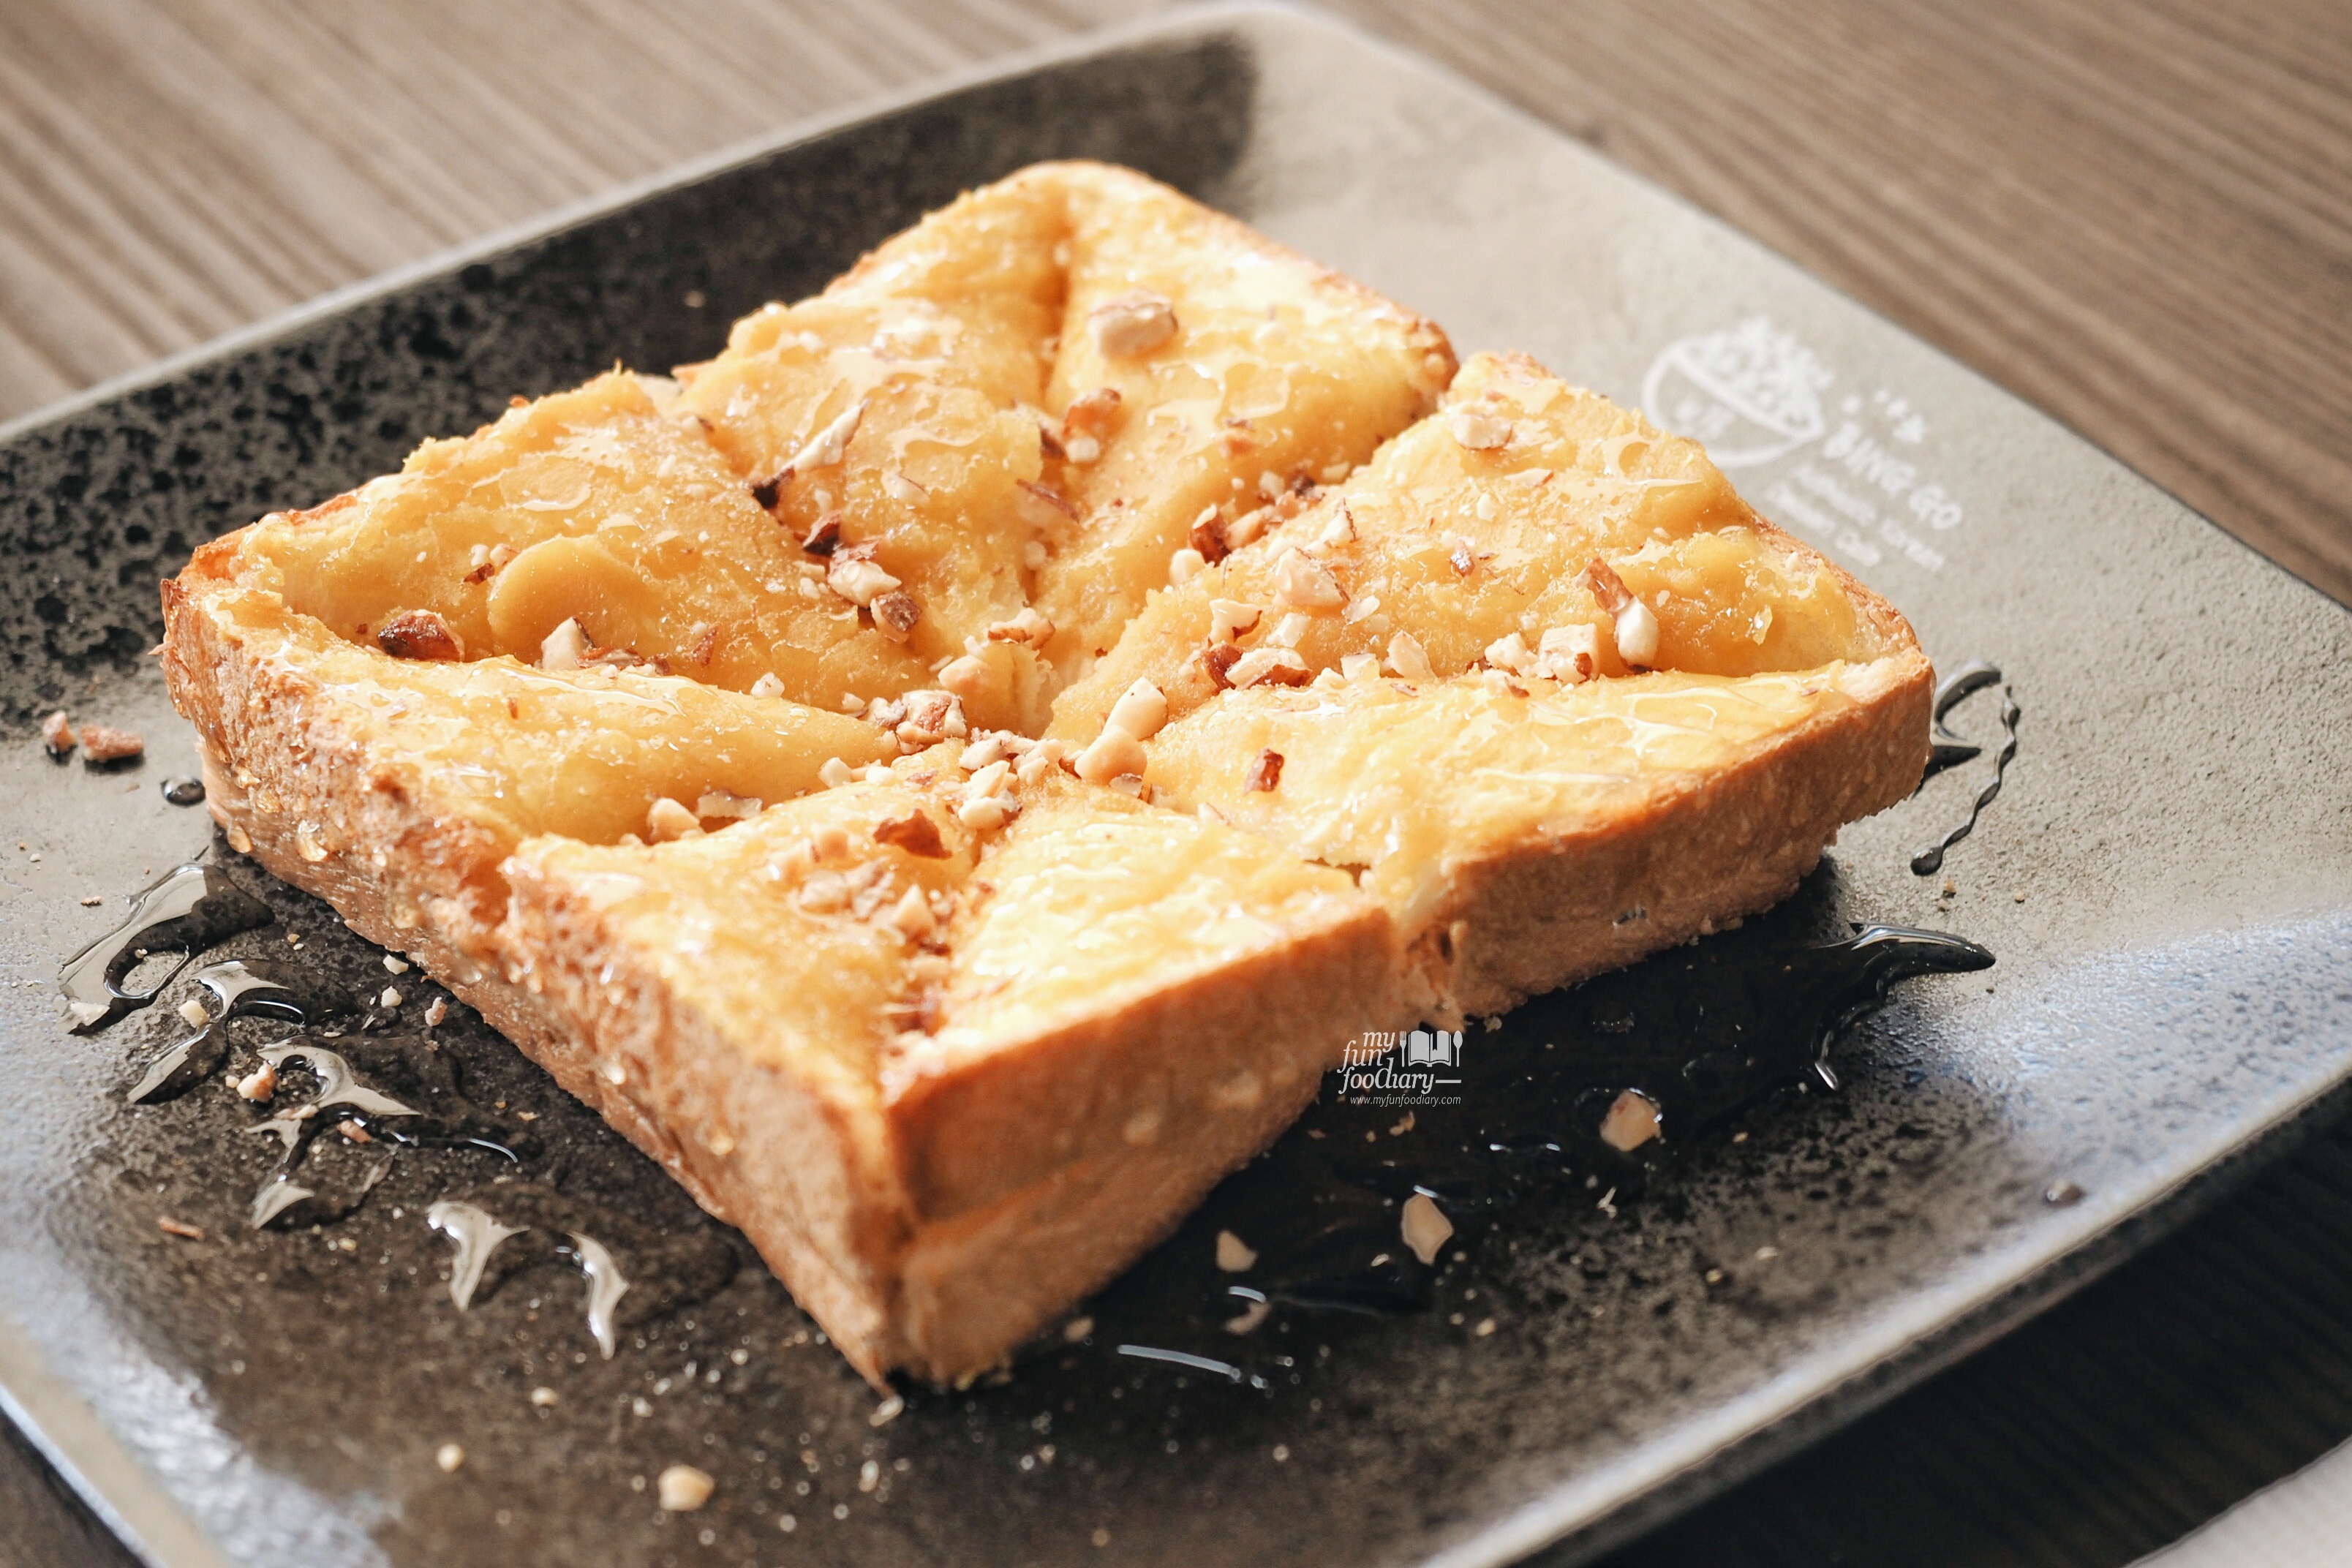 Sweet Potato and Cheese Toast Bing Go Korean Dessert Cafe by Myfunfoodiary